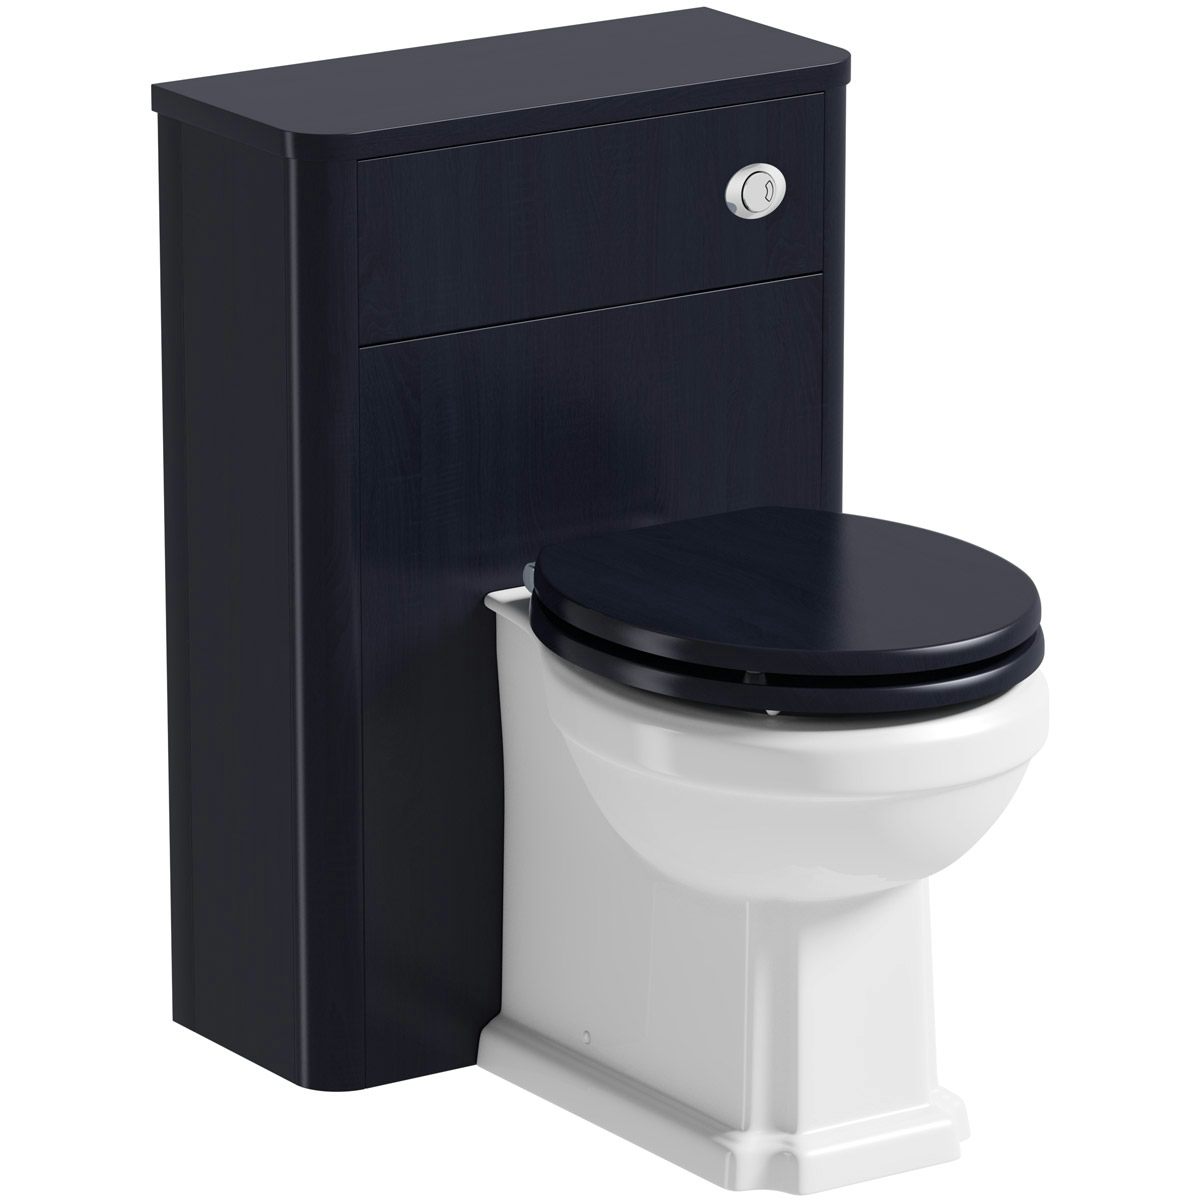 The Bath Co. Beaumont sapphire blue back to wall unit and traditional toilet with wooden seat